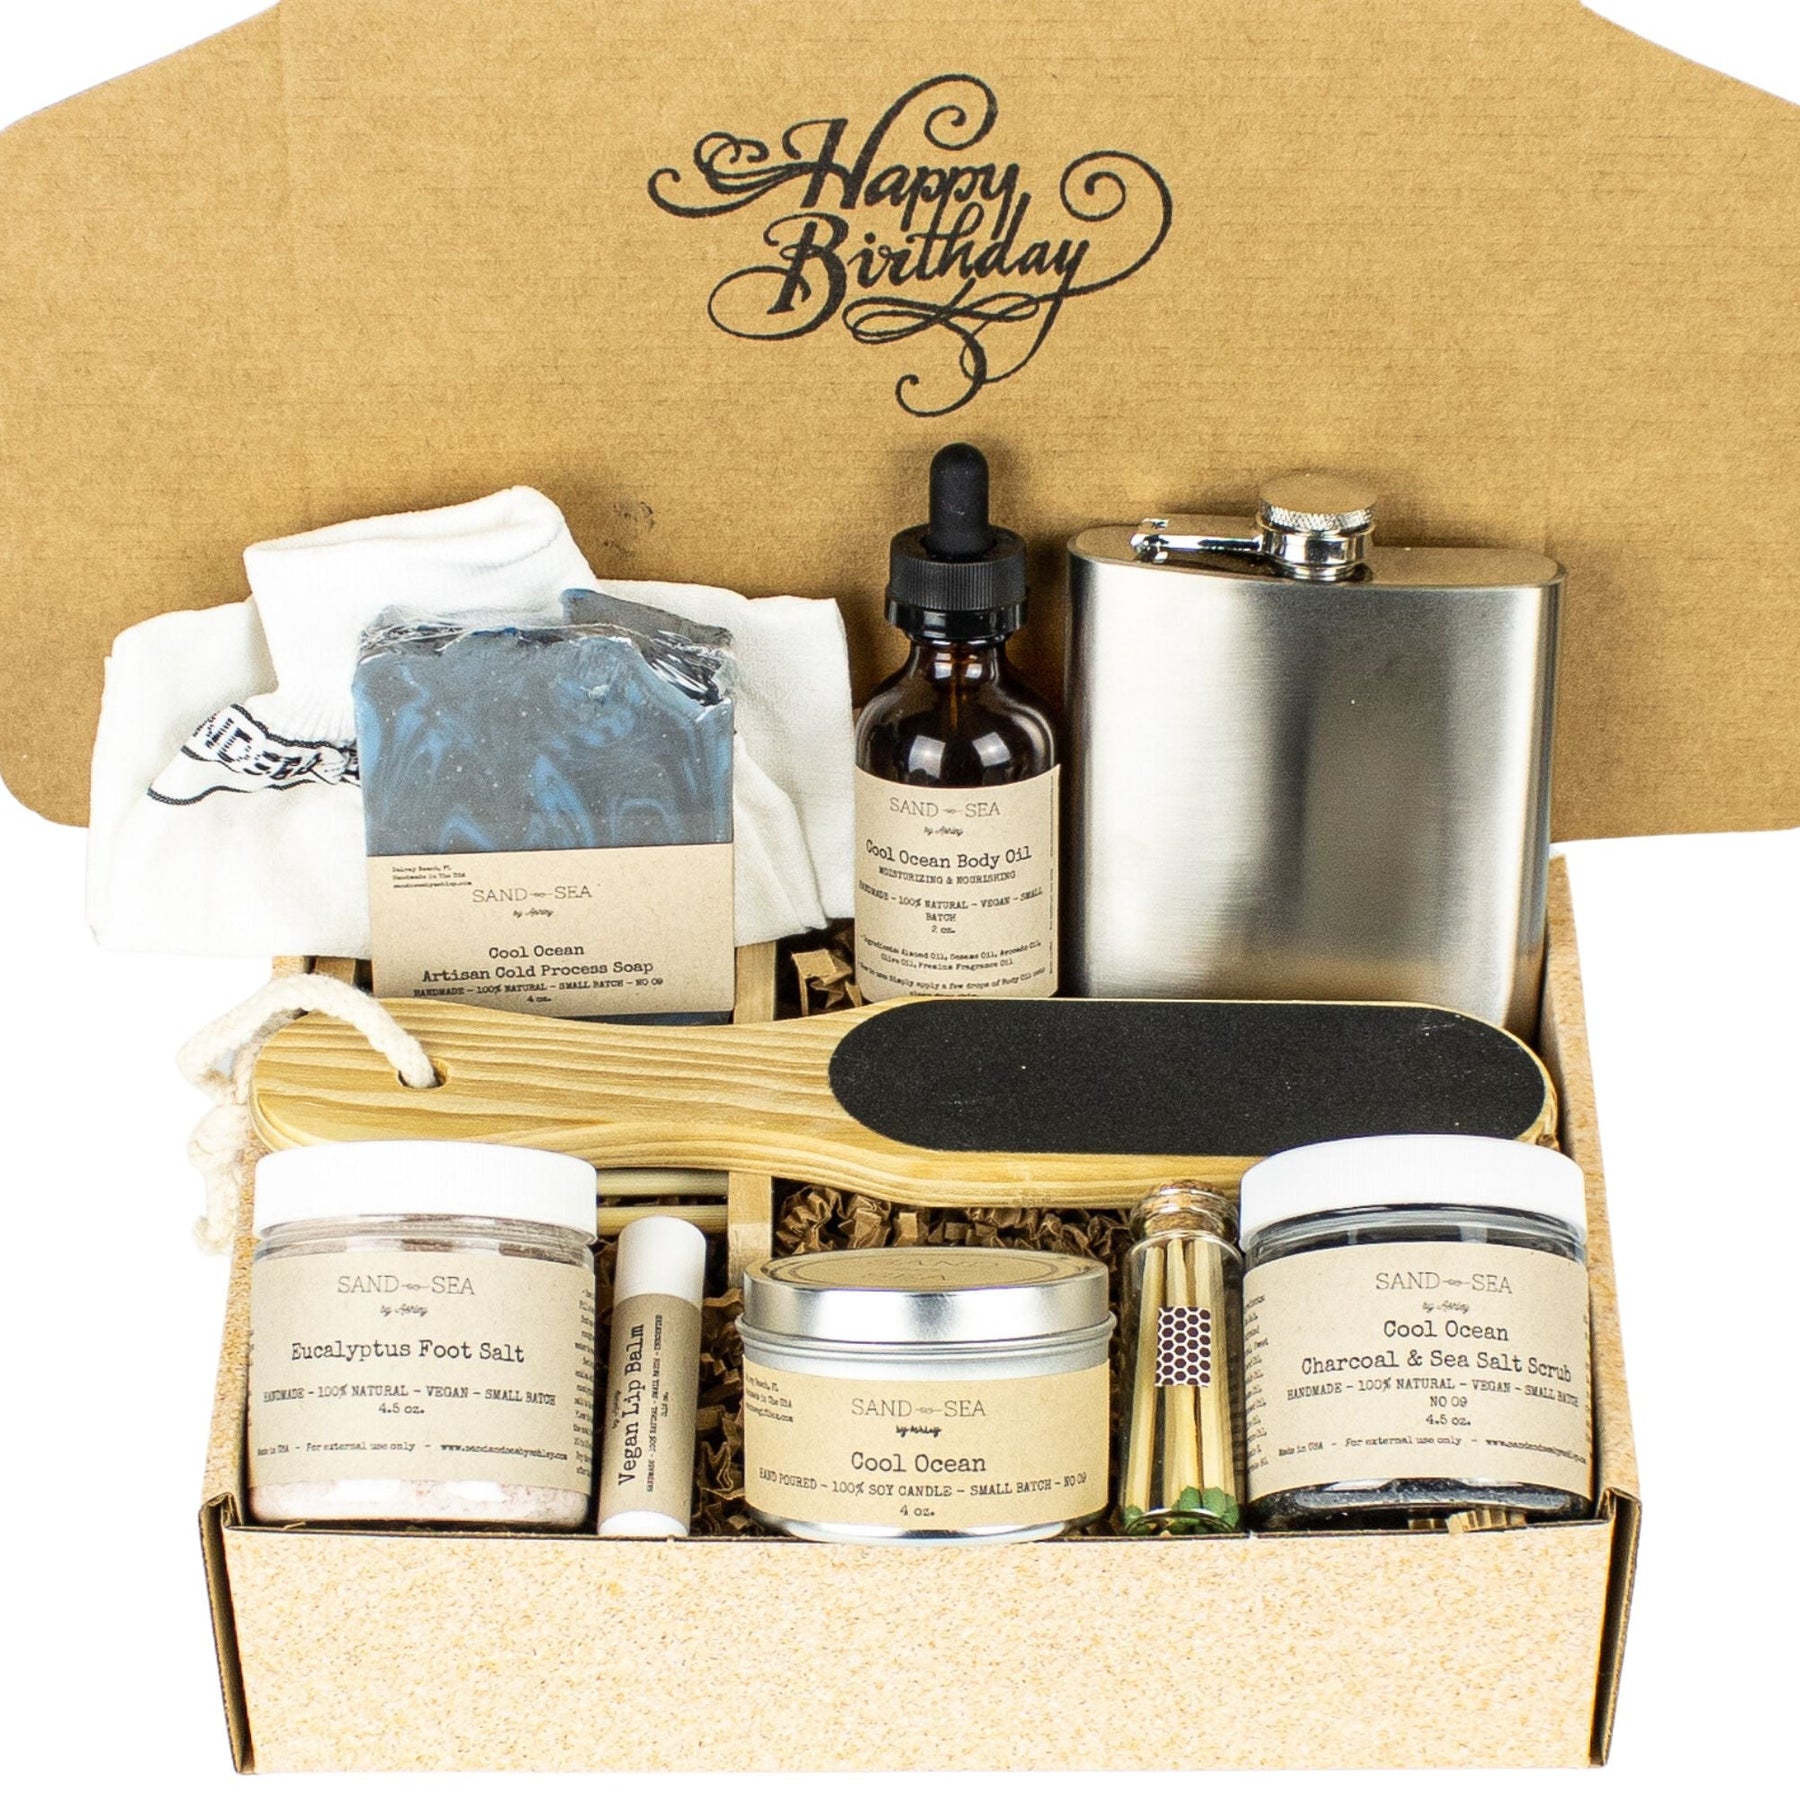 Happy Birthday Gifts for Men - Spa Gift Set for Dad, Husband, Boyfriend - Relaxation Self Care Gift Basket for Him